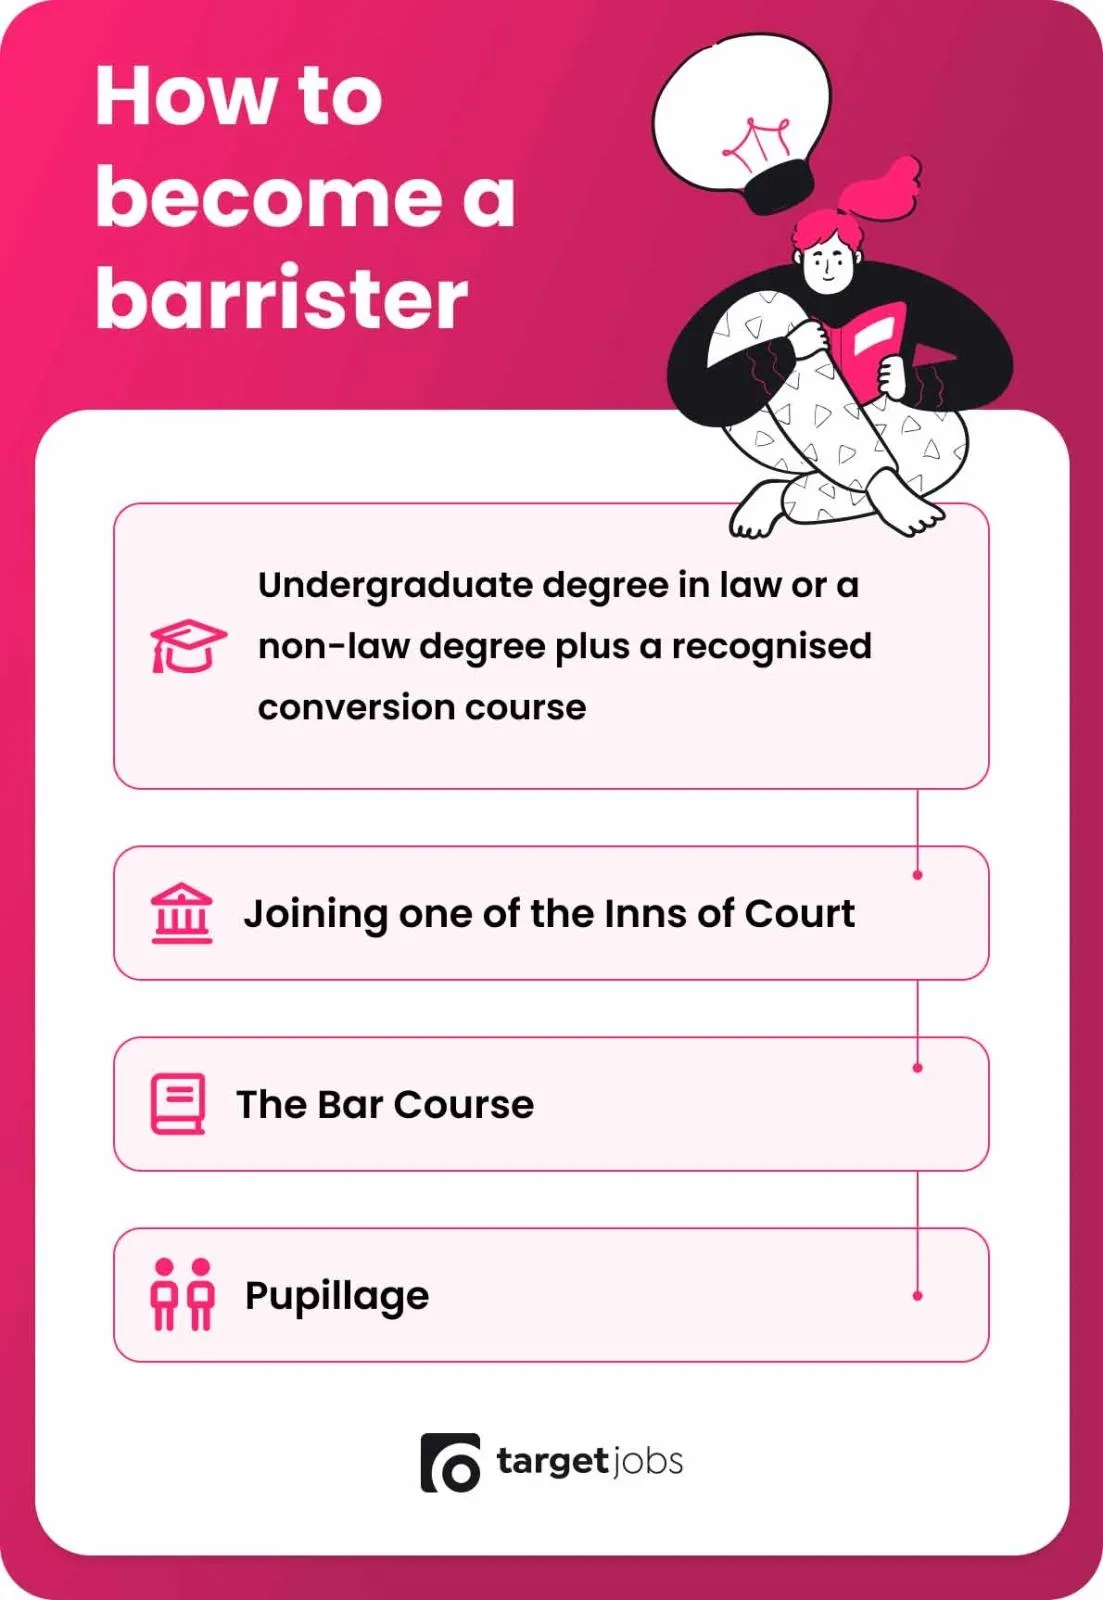 How to become a barrister infographic: law degree or conversion course, joining an Inns of Court, the Bar course and securing pupillage